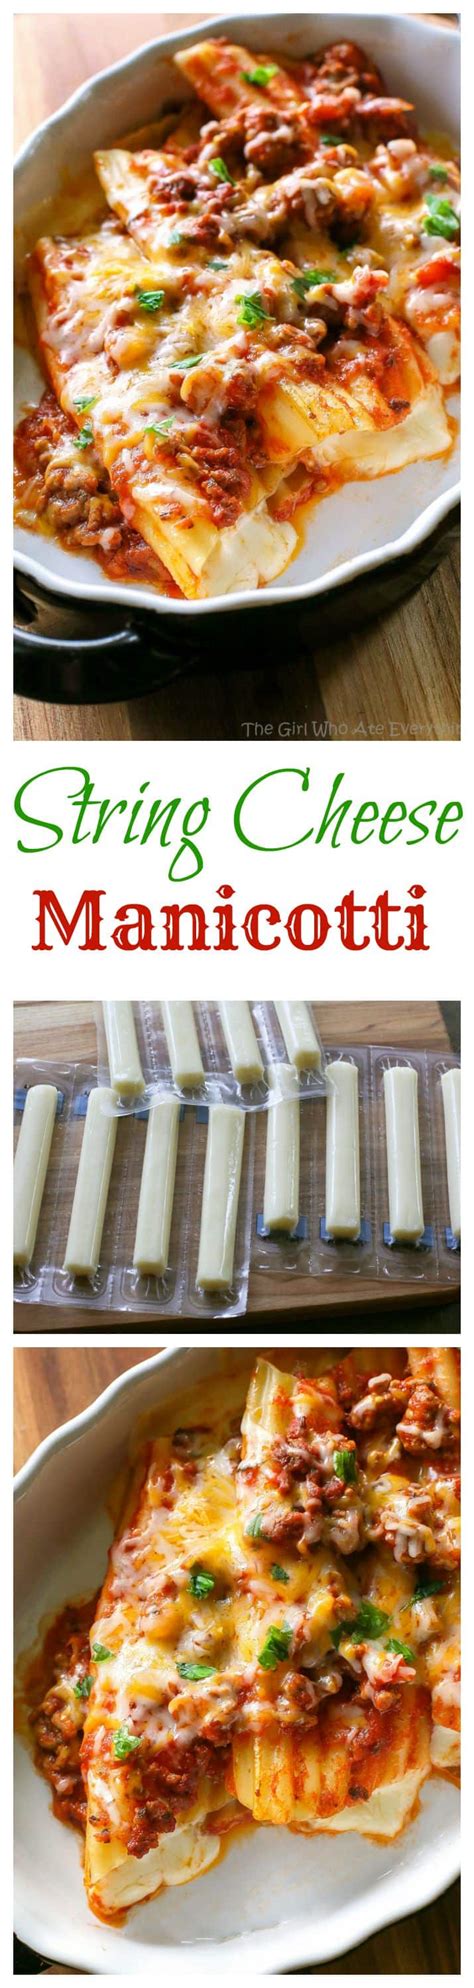 String Cheese Manicotti The Girl Who Ate Everything